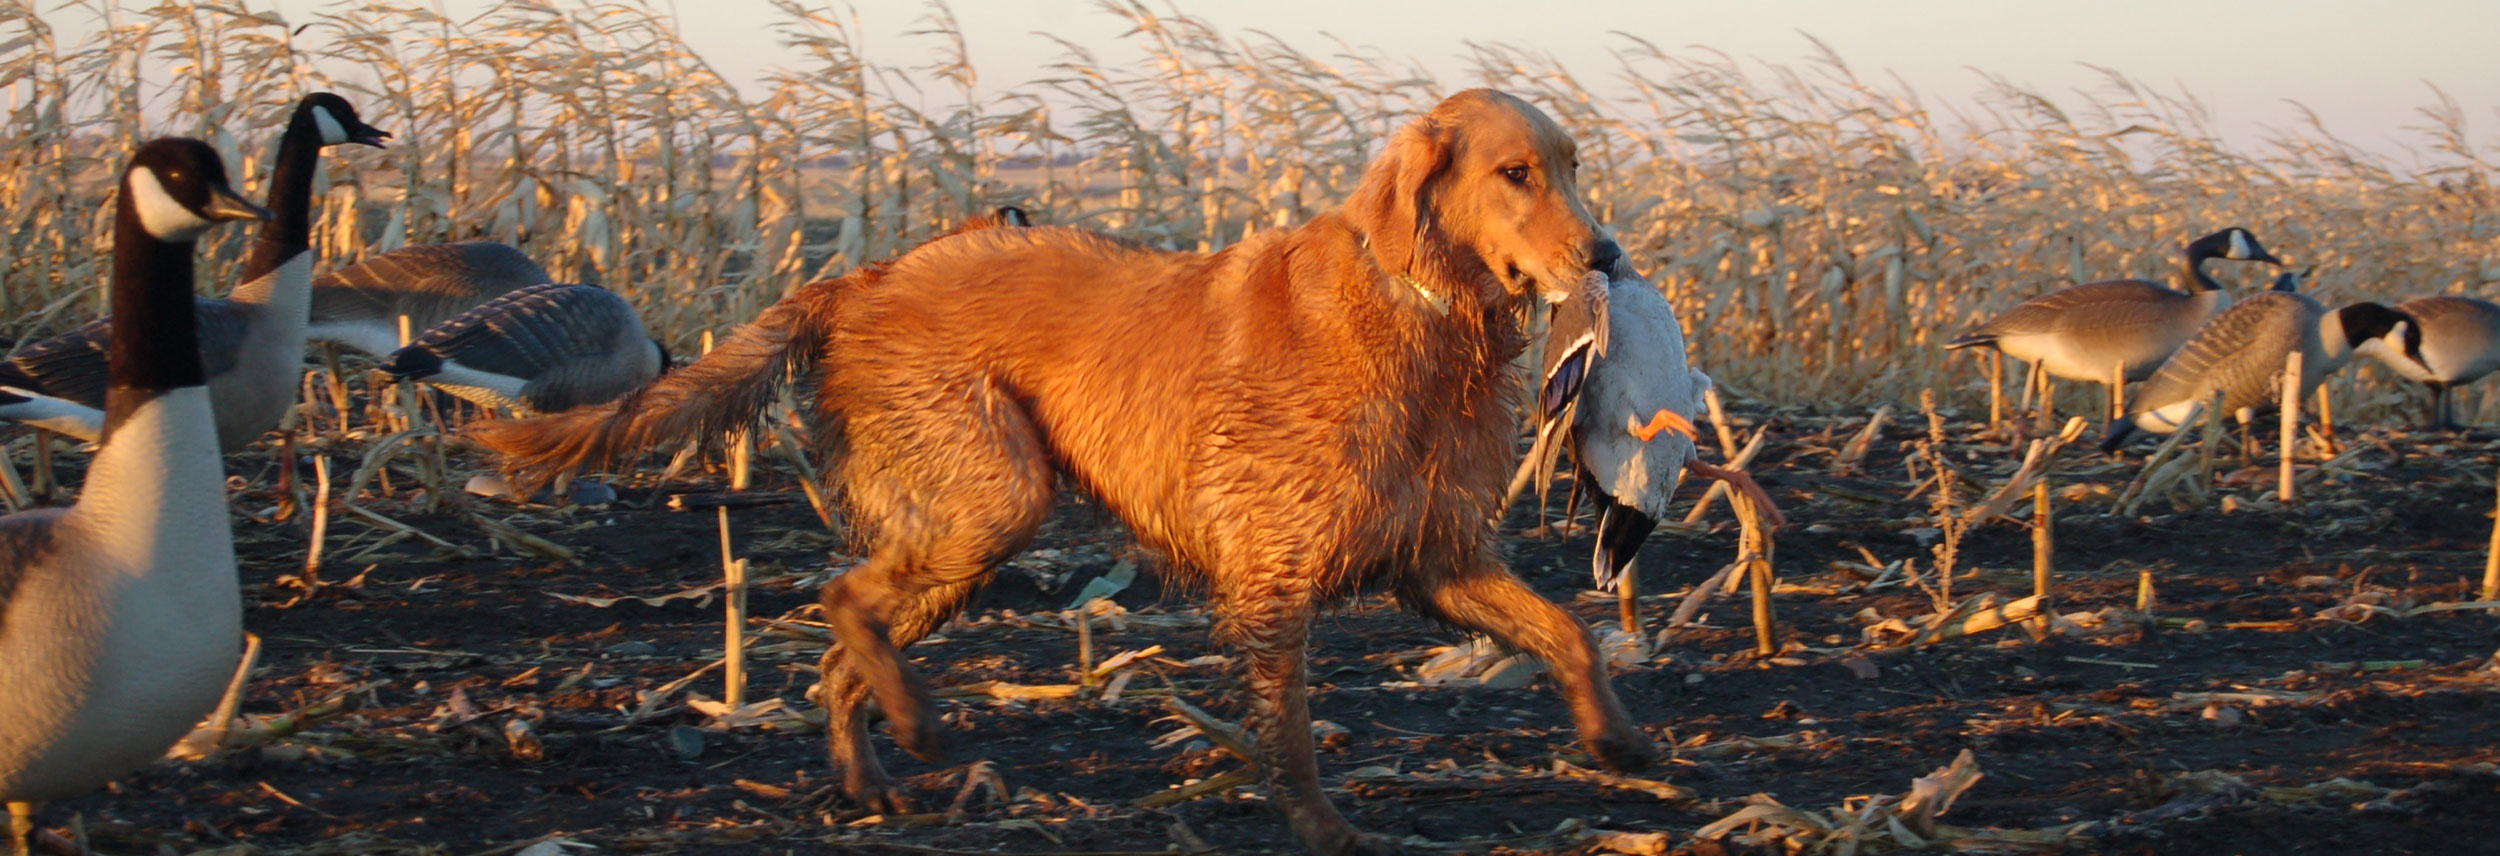 Dog among decoys carrying harvested duck